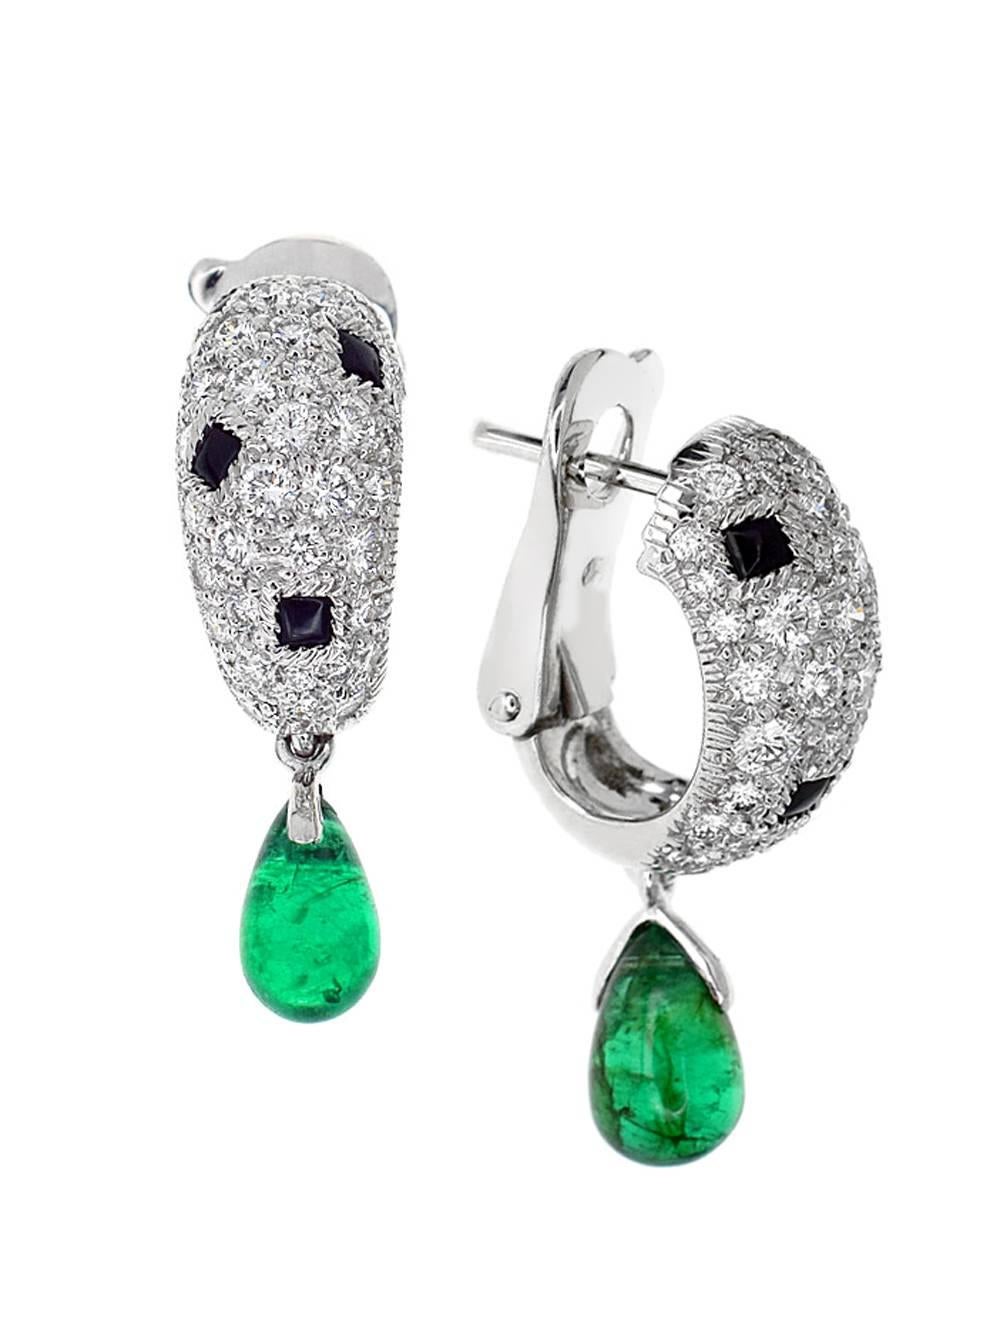 An elegant pair of Cartier earrings, featuring 1.5ct of round brilliant cut diamonds, onyx and lush green hanging emeralds

The earrings have a length of .94